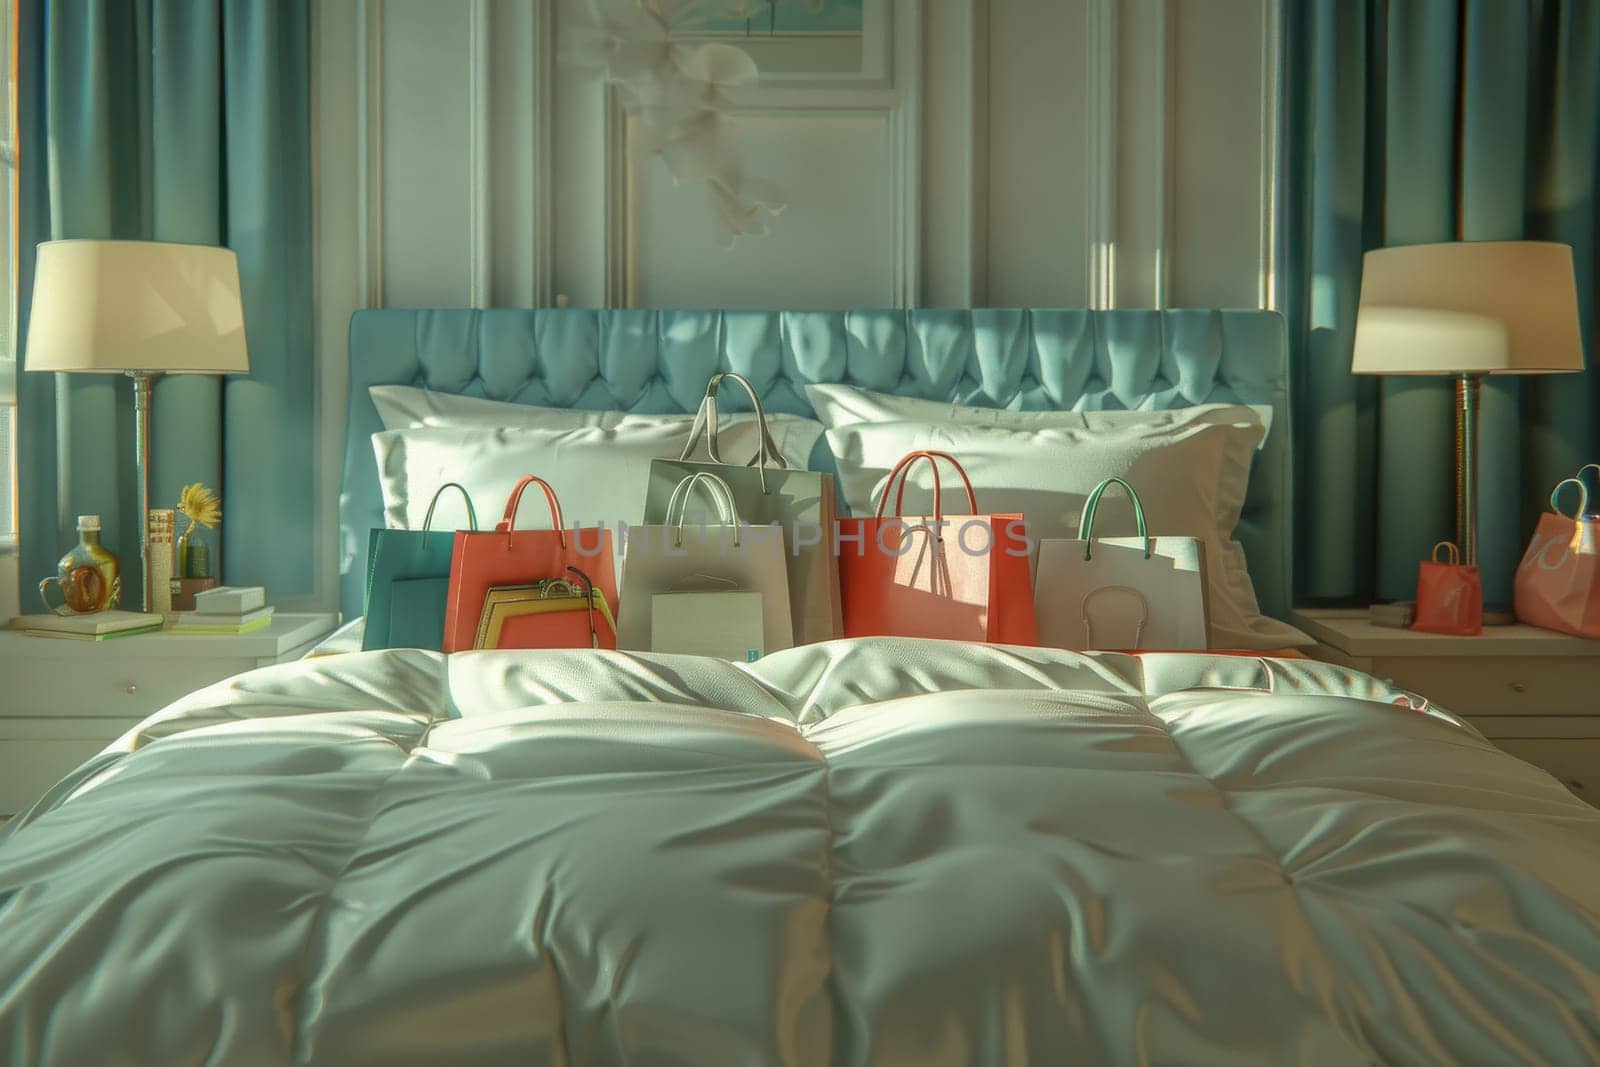 Many Shopping bag on hotel bed. shopping concept by itchaznong